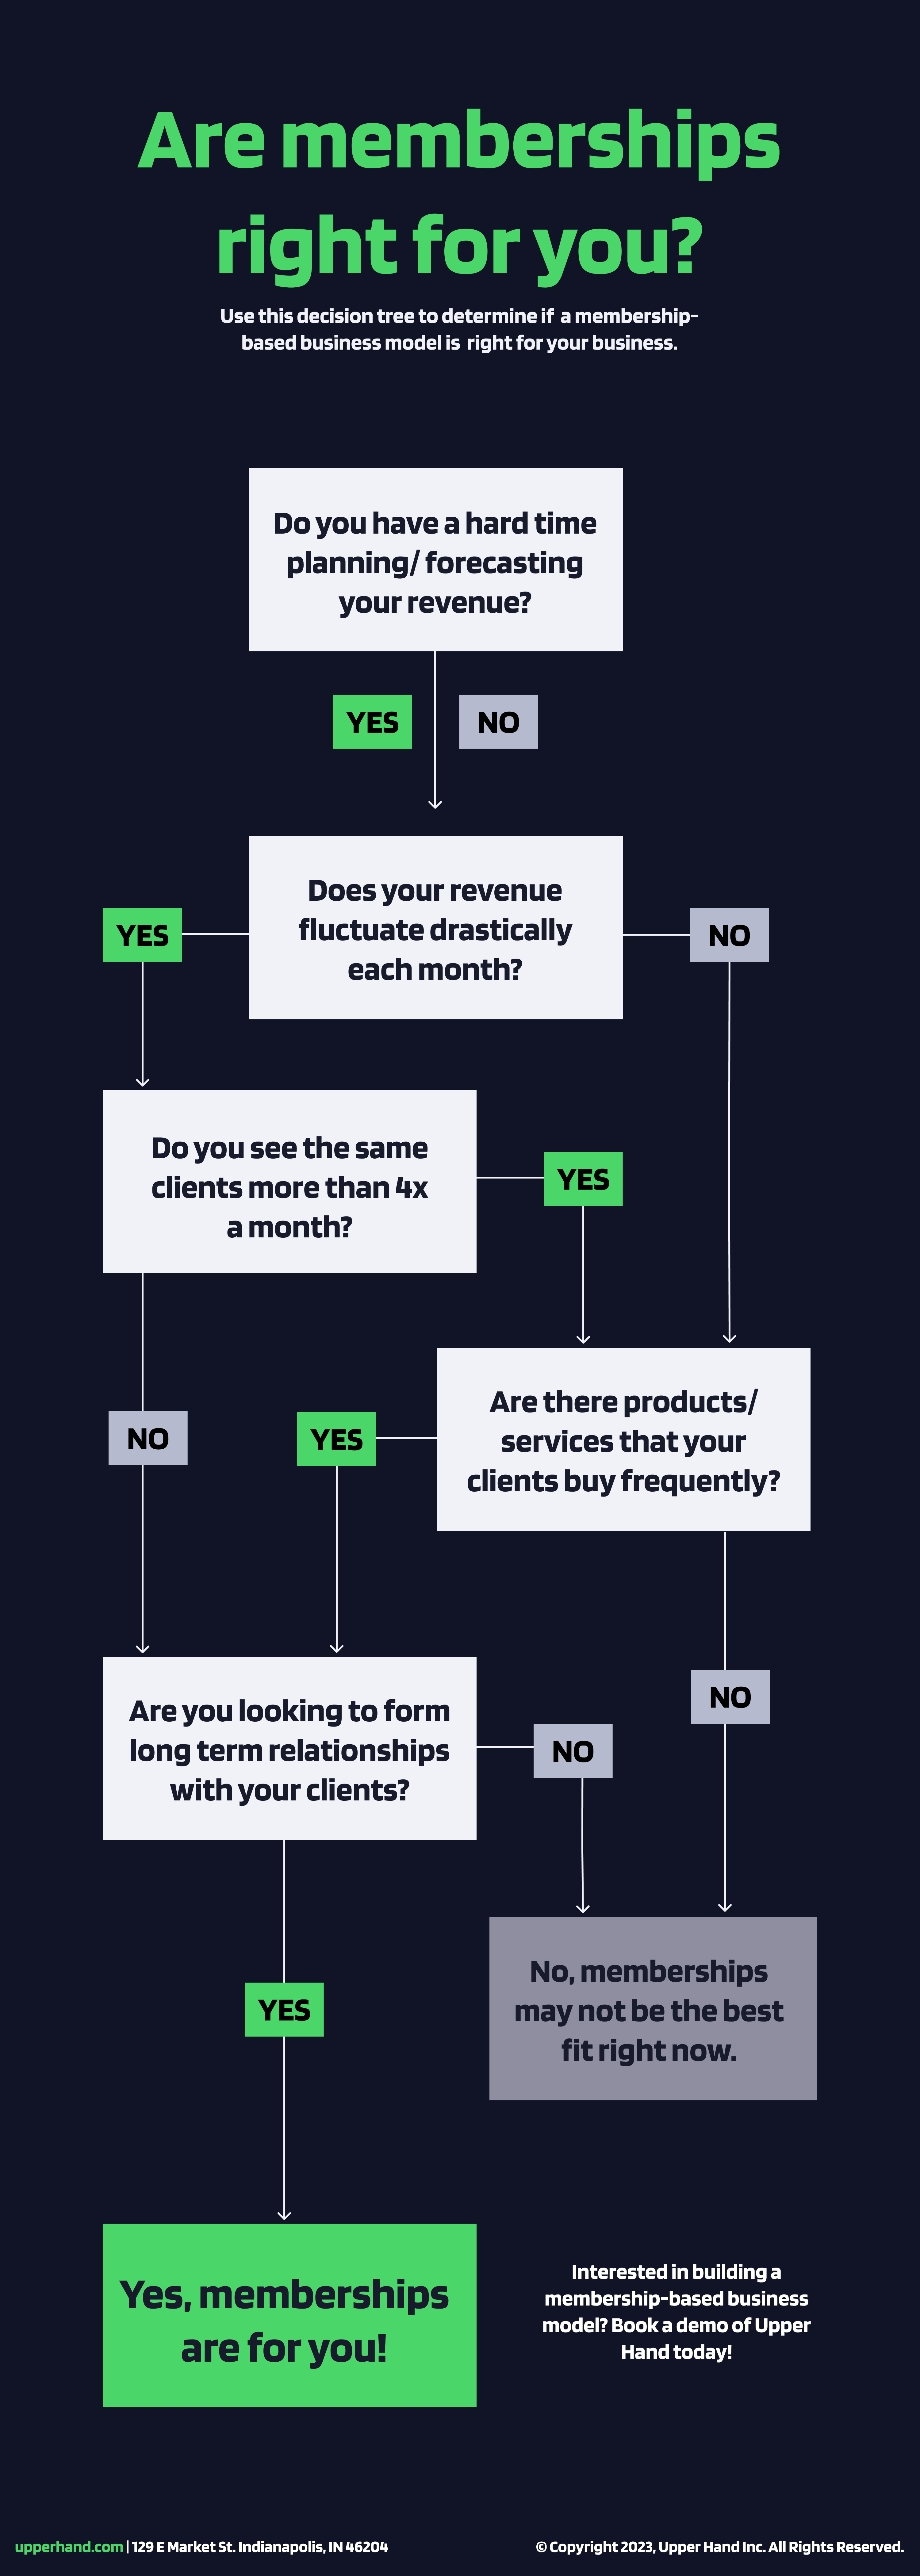 Upper hand – should you utilize a membership-based business model? Use this decision tree to find out.